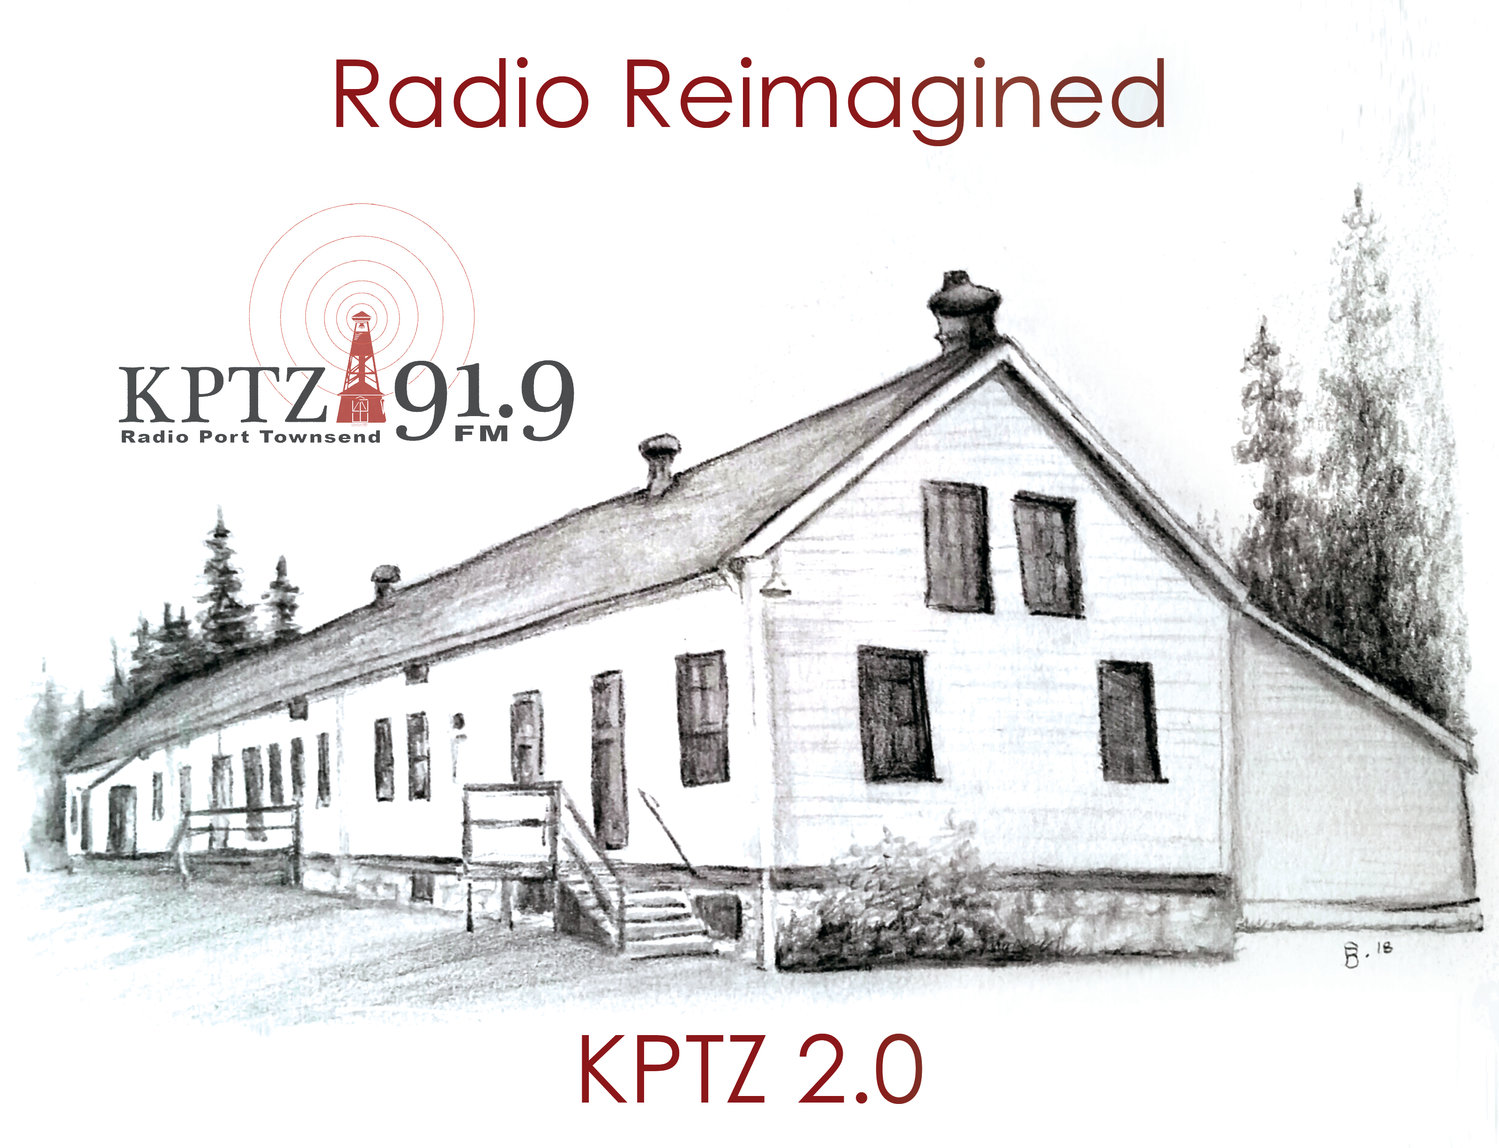 The “KPTZ 2.0” capital campaign is raising funds to relocate the community radio station to historic Building 305, in the center of the proposed Makers Square arts campus at Fort Worden, as seen in this illustration.